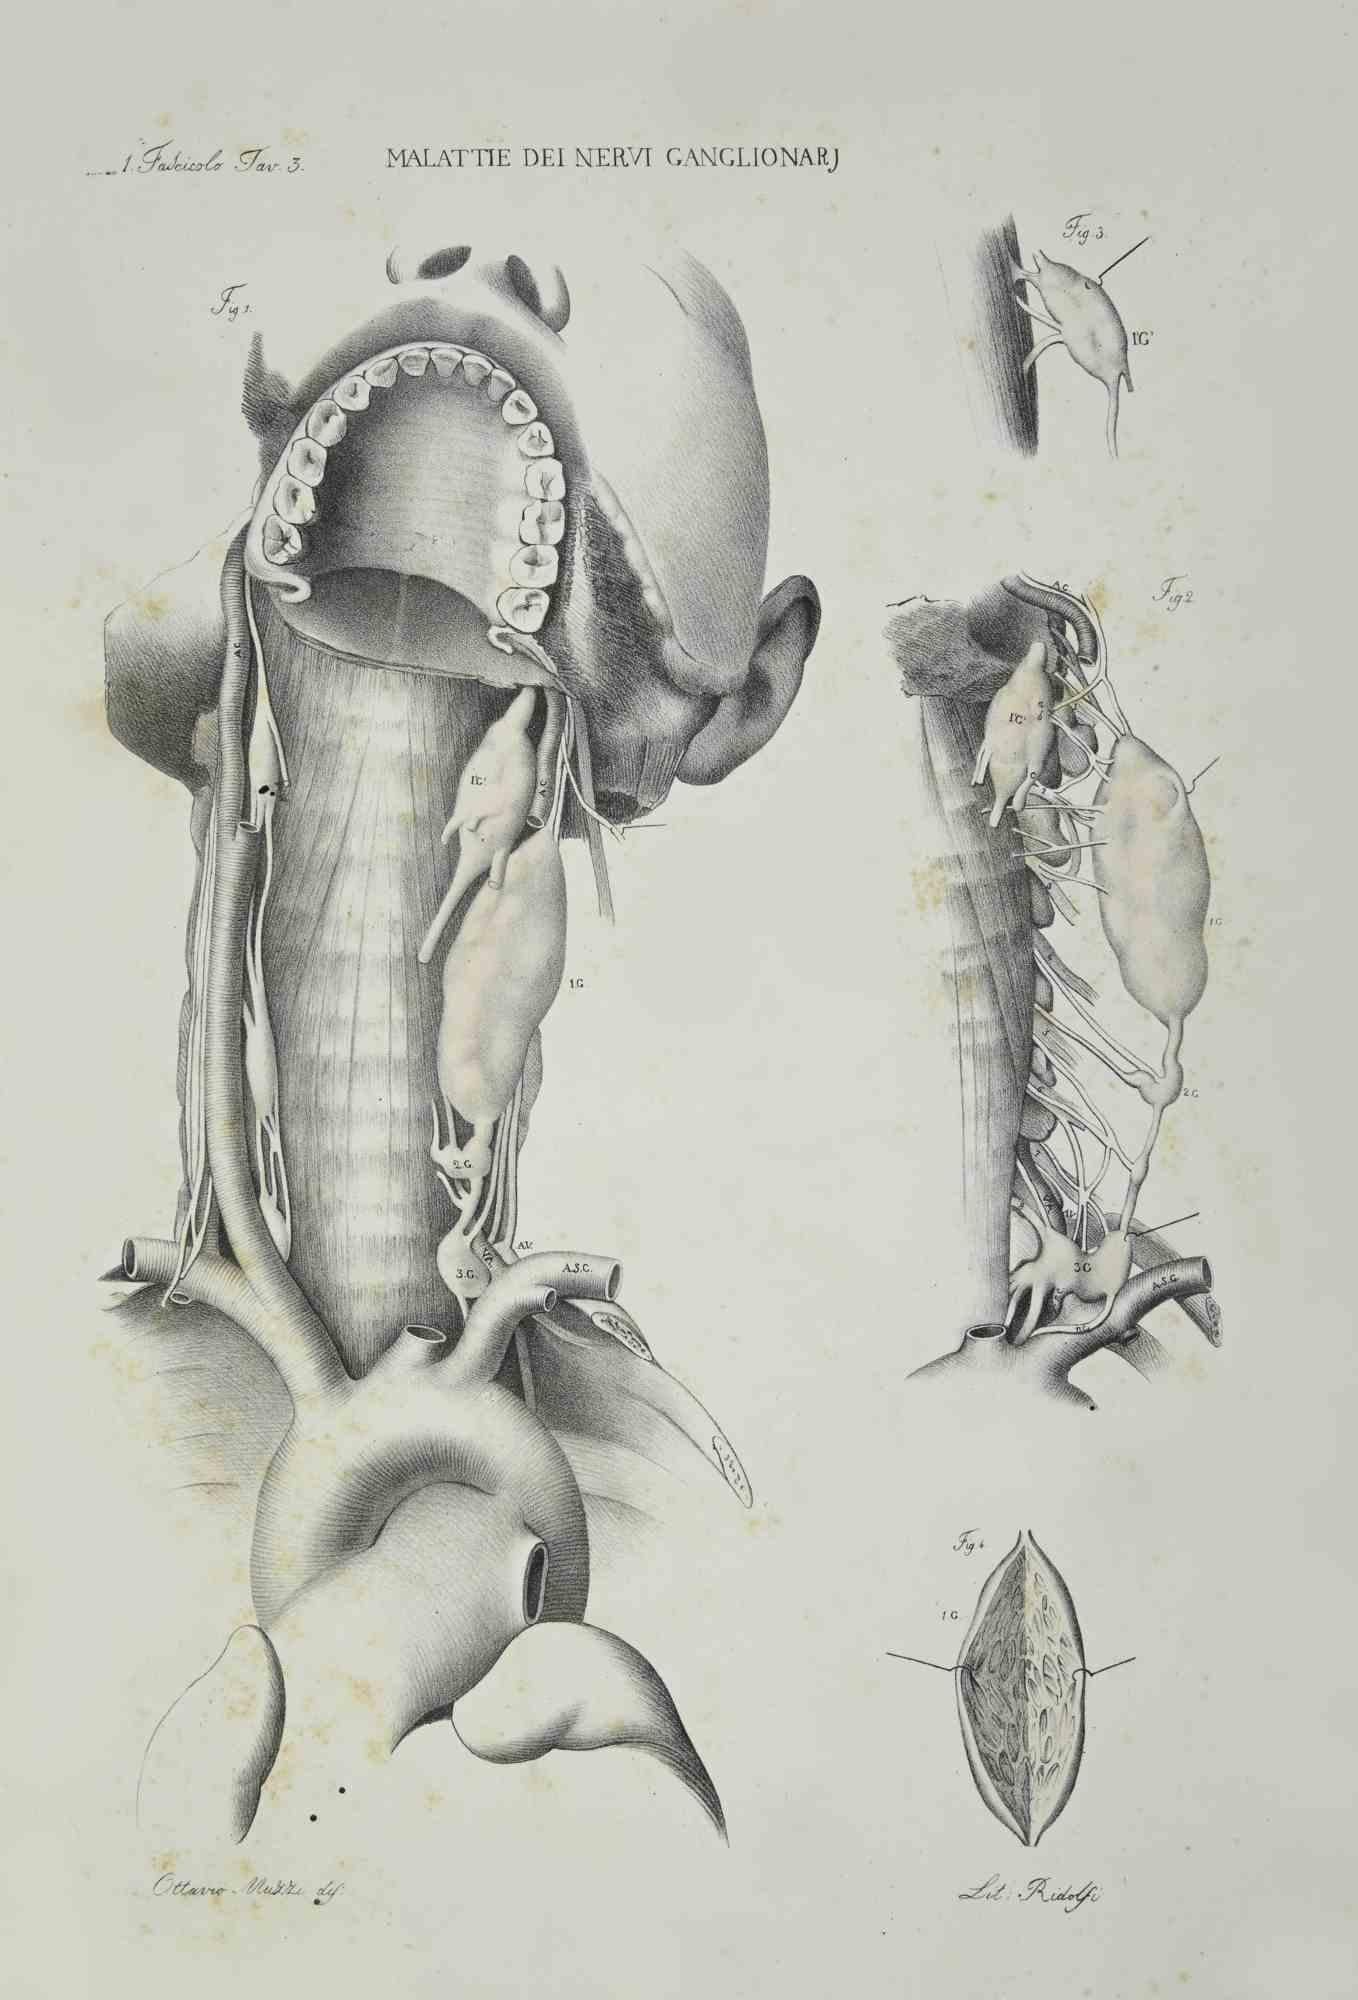 Ganglion Nerve Diseases is a lithograph hand colored by Ottavio Muzzi for the edition of Antoine Chazal,Human Anatomy, Printers Batelli and Ridolfi, realized in 1843.

Signed on plate on the lower left margin.